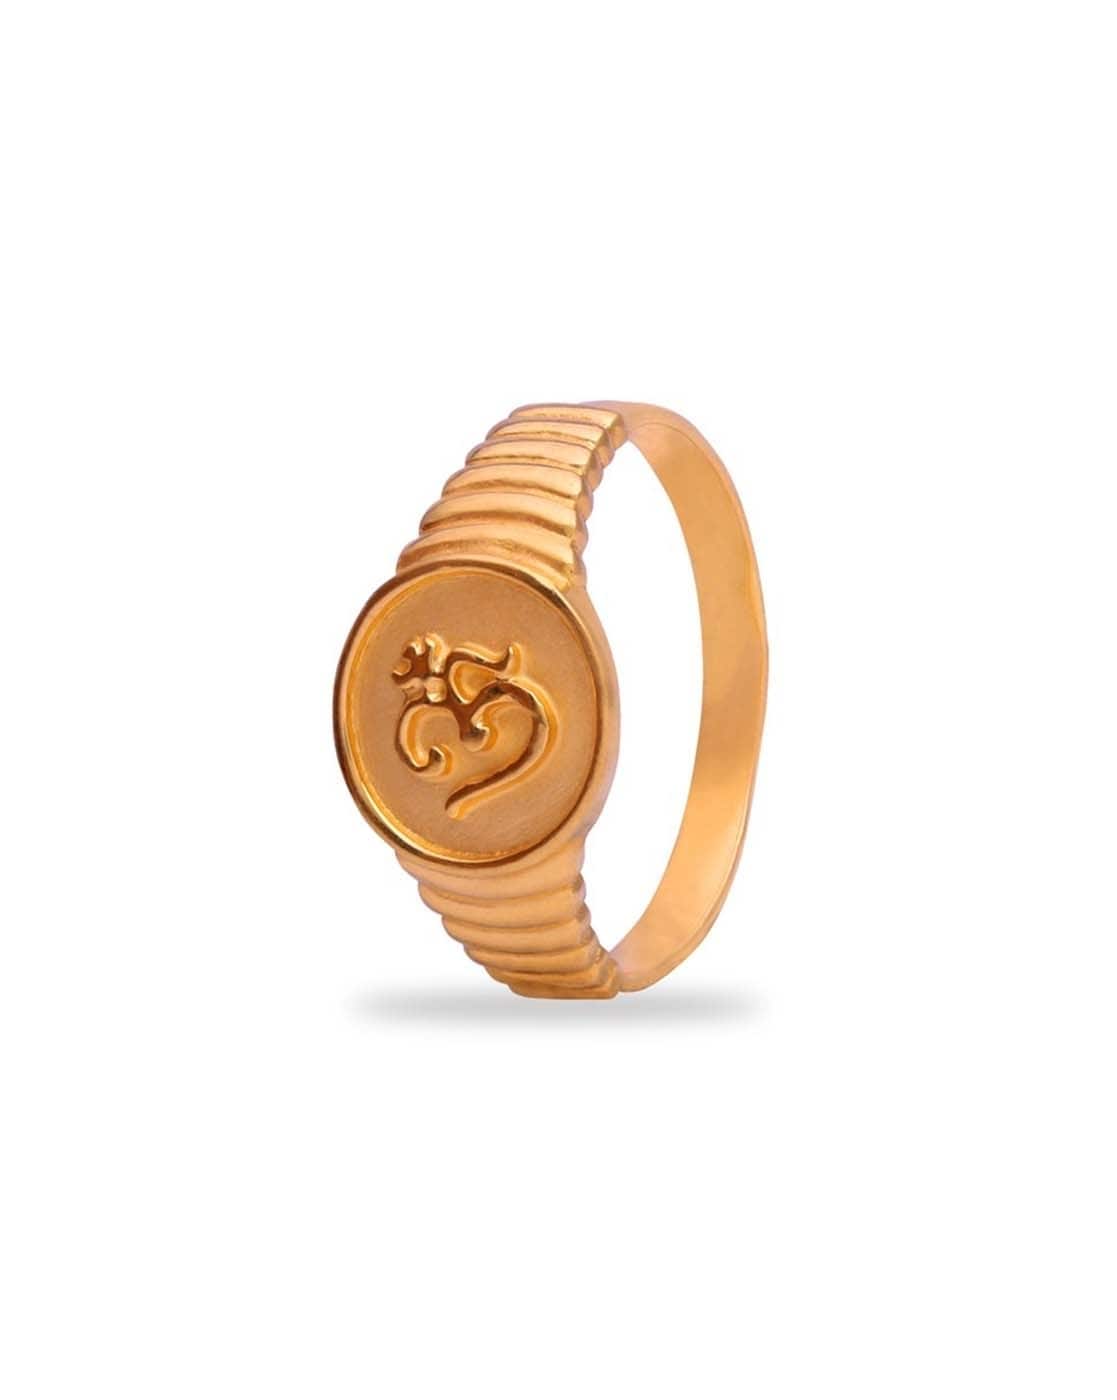 Showroom of 916 gold casting swastik design gents ring | Jewelxy - 163587